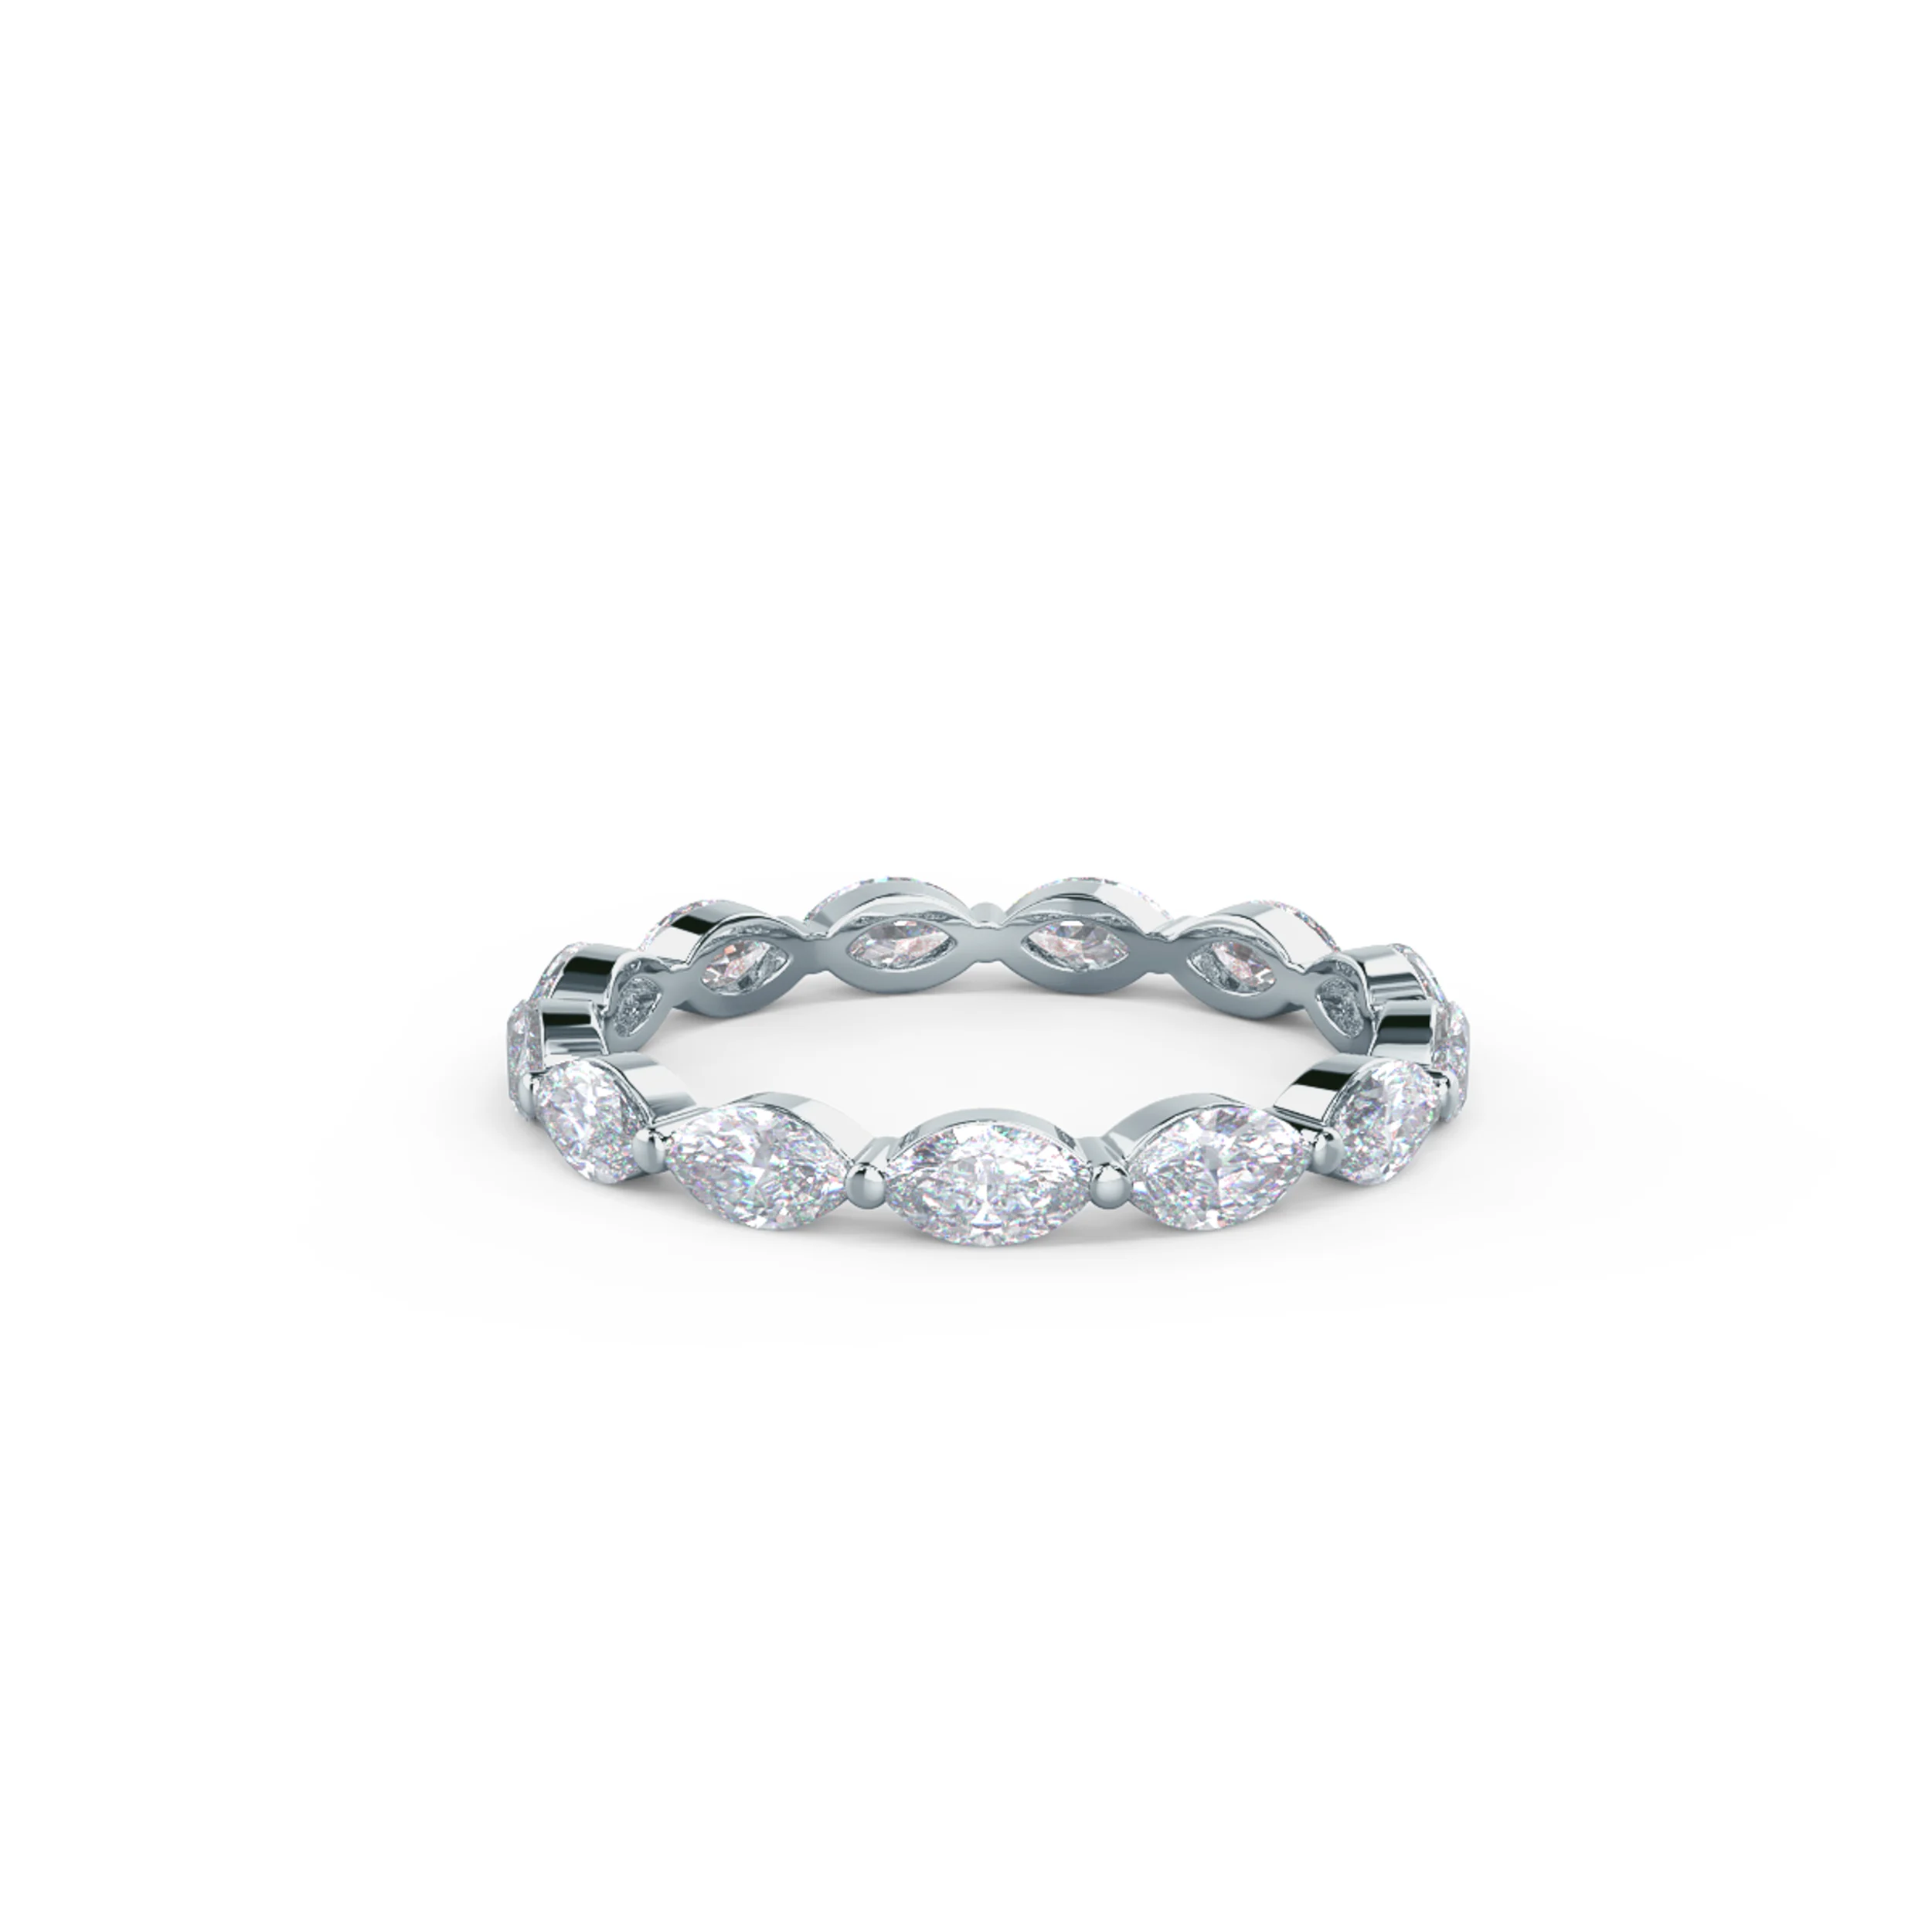 18k White Gold Marquise Diamond East-West Eternity Band featuring 1.3 Carat Man Made Diamonds (Main View)